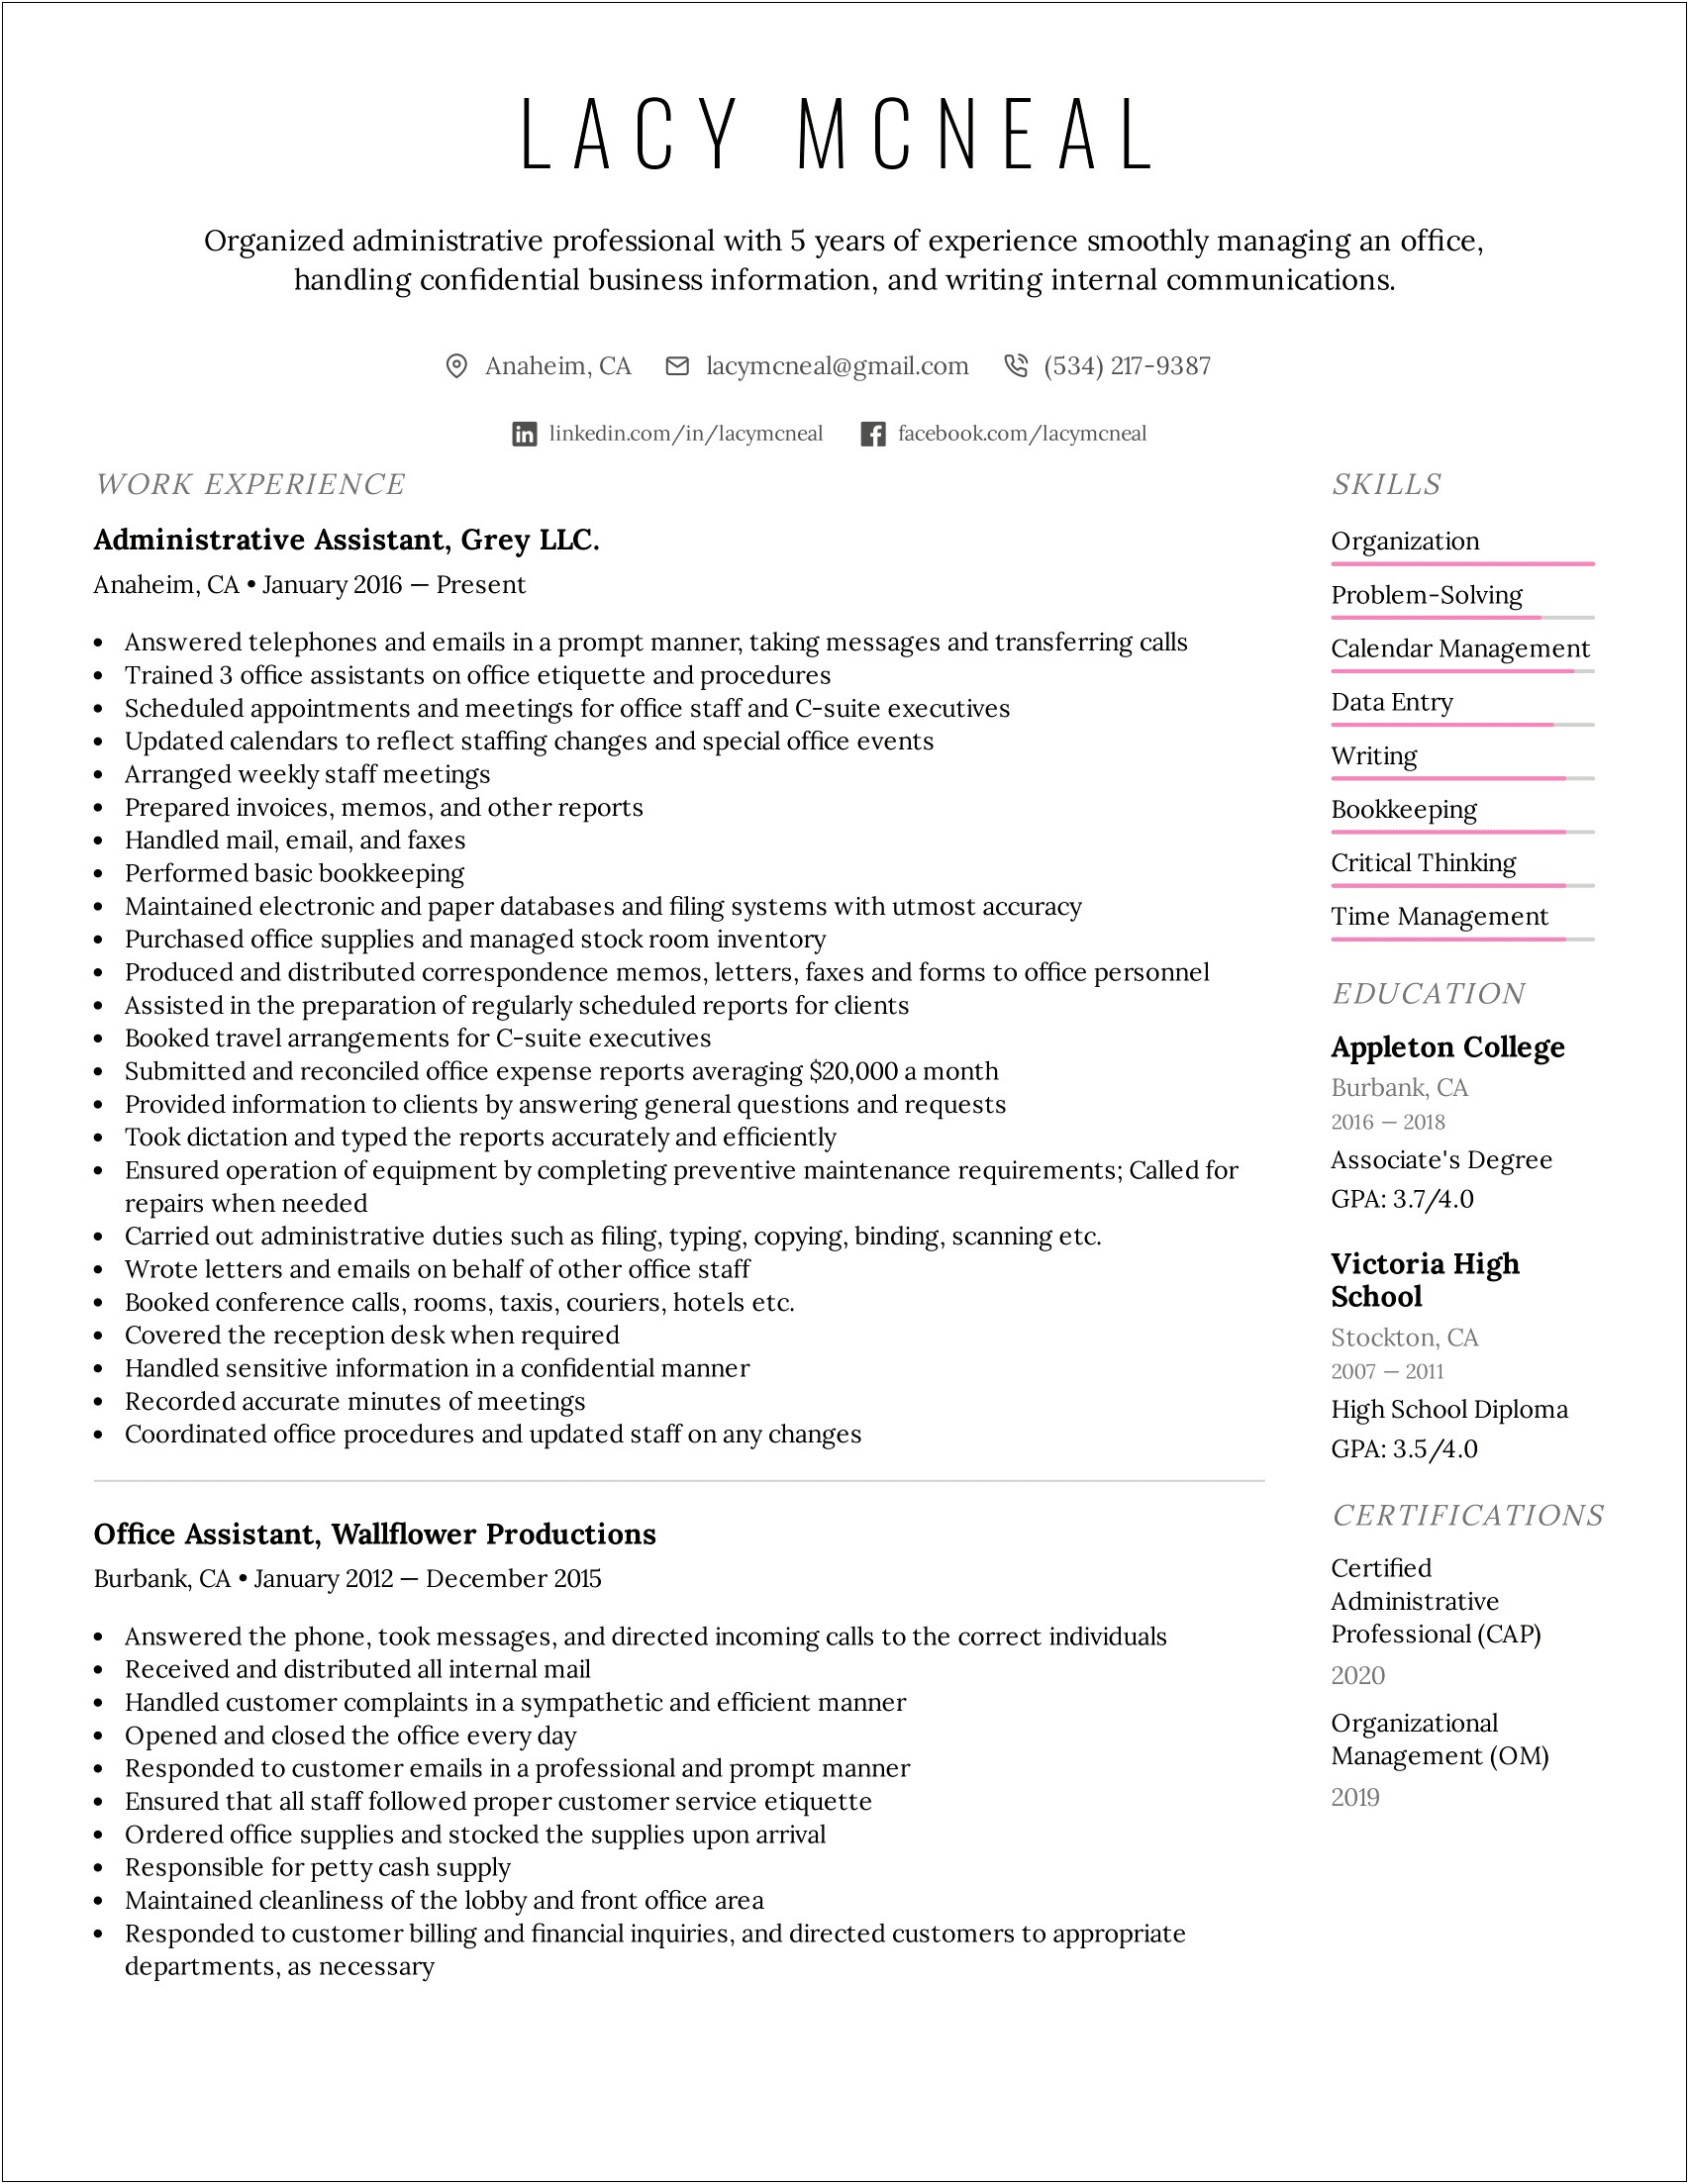 Objectives On Resume For Administrative Assistant